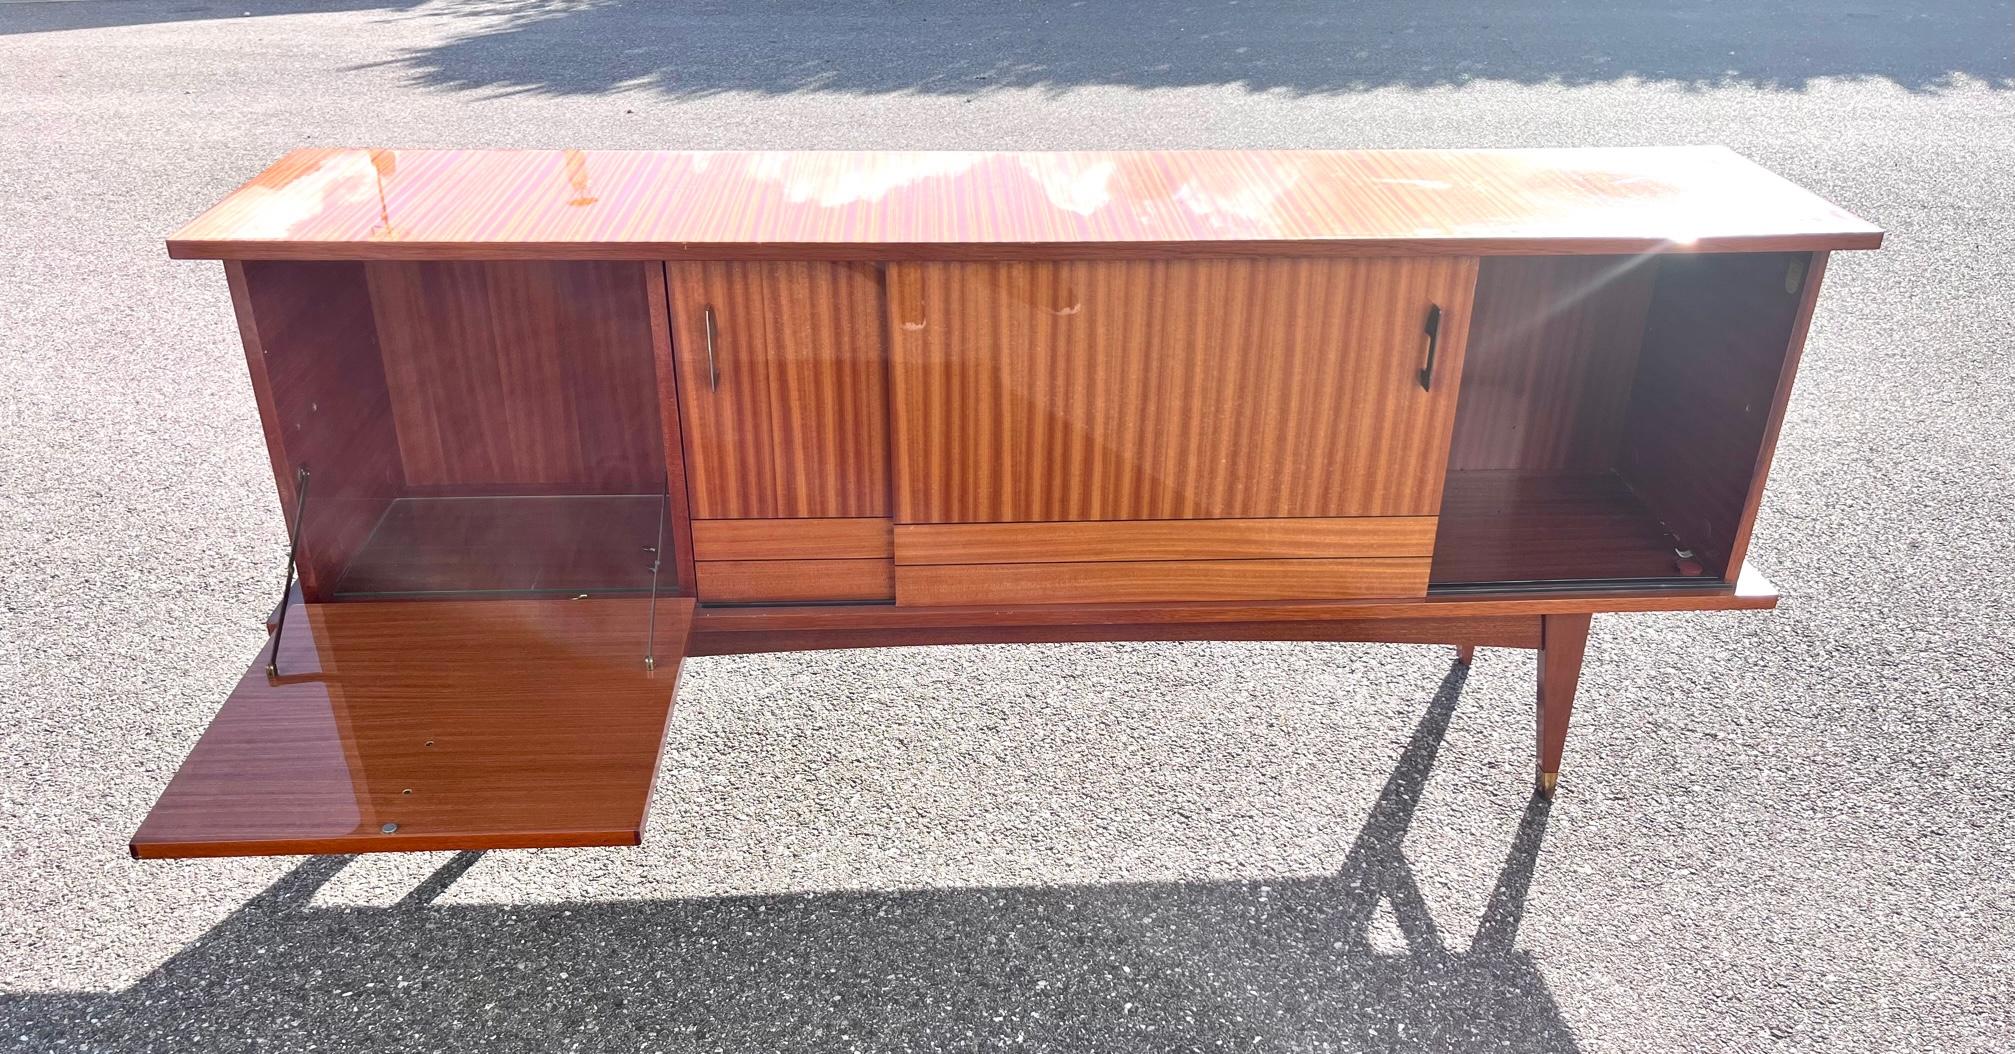 1960's Modernist Teak Cabinet In Good Condition For Sale In Brooklyn, NY